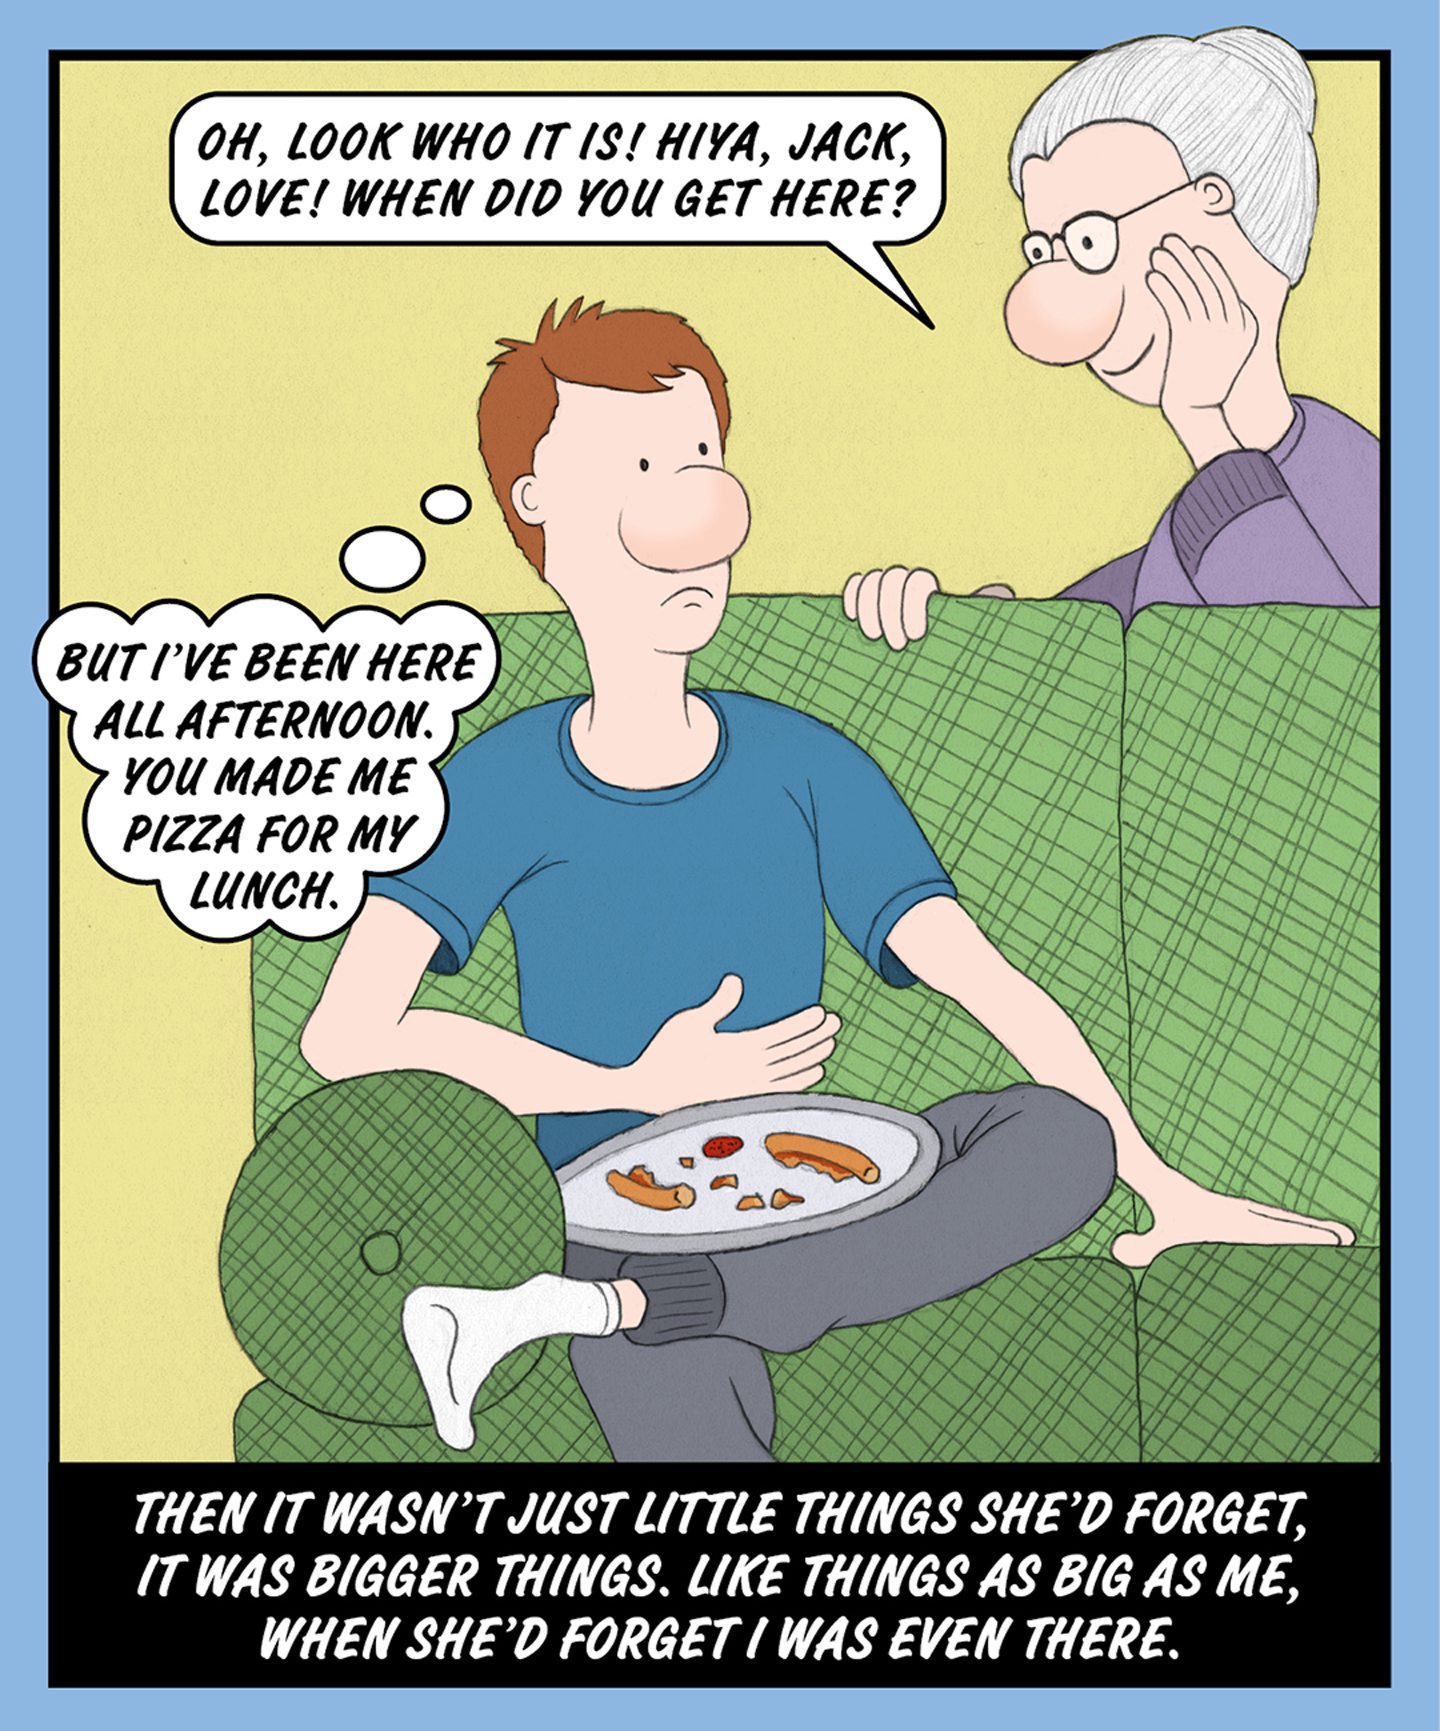 A comic illustration of a young man sitting on the couch with a plate on his lap and a granny standing behind the couch looking at him. The speech bubble from the granny reads: OH, LOOK WHO IT IS! HIYA, JACK, LOVE! WHEN DID YOU GET HERE? The thought bubble from the man reads: BUT I'VE BEEN HERE ALL AFTERNOON. YOU MADE ME PIZZA FOR MY LUNCH. The words below the image read: THEN IT WASN'T JUST LITTLE THINGS SHE'D FORGET, IT WAS BIGGER THINGS. LIKE THINGS AS BIG AS ME, WHEN SHE'D FORGET I WAS EVEN THERE.